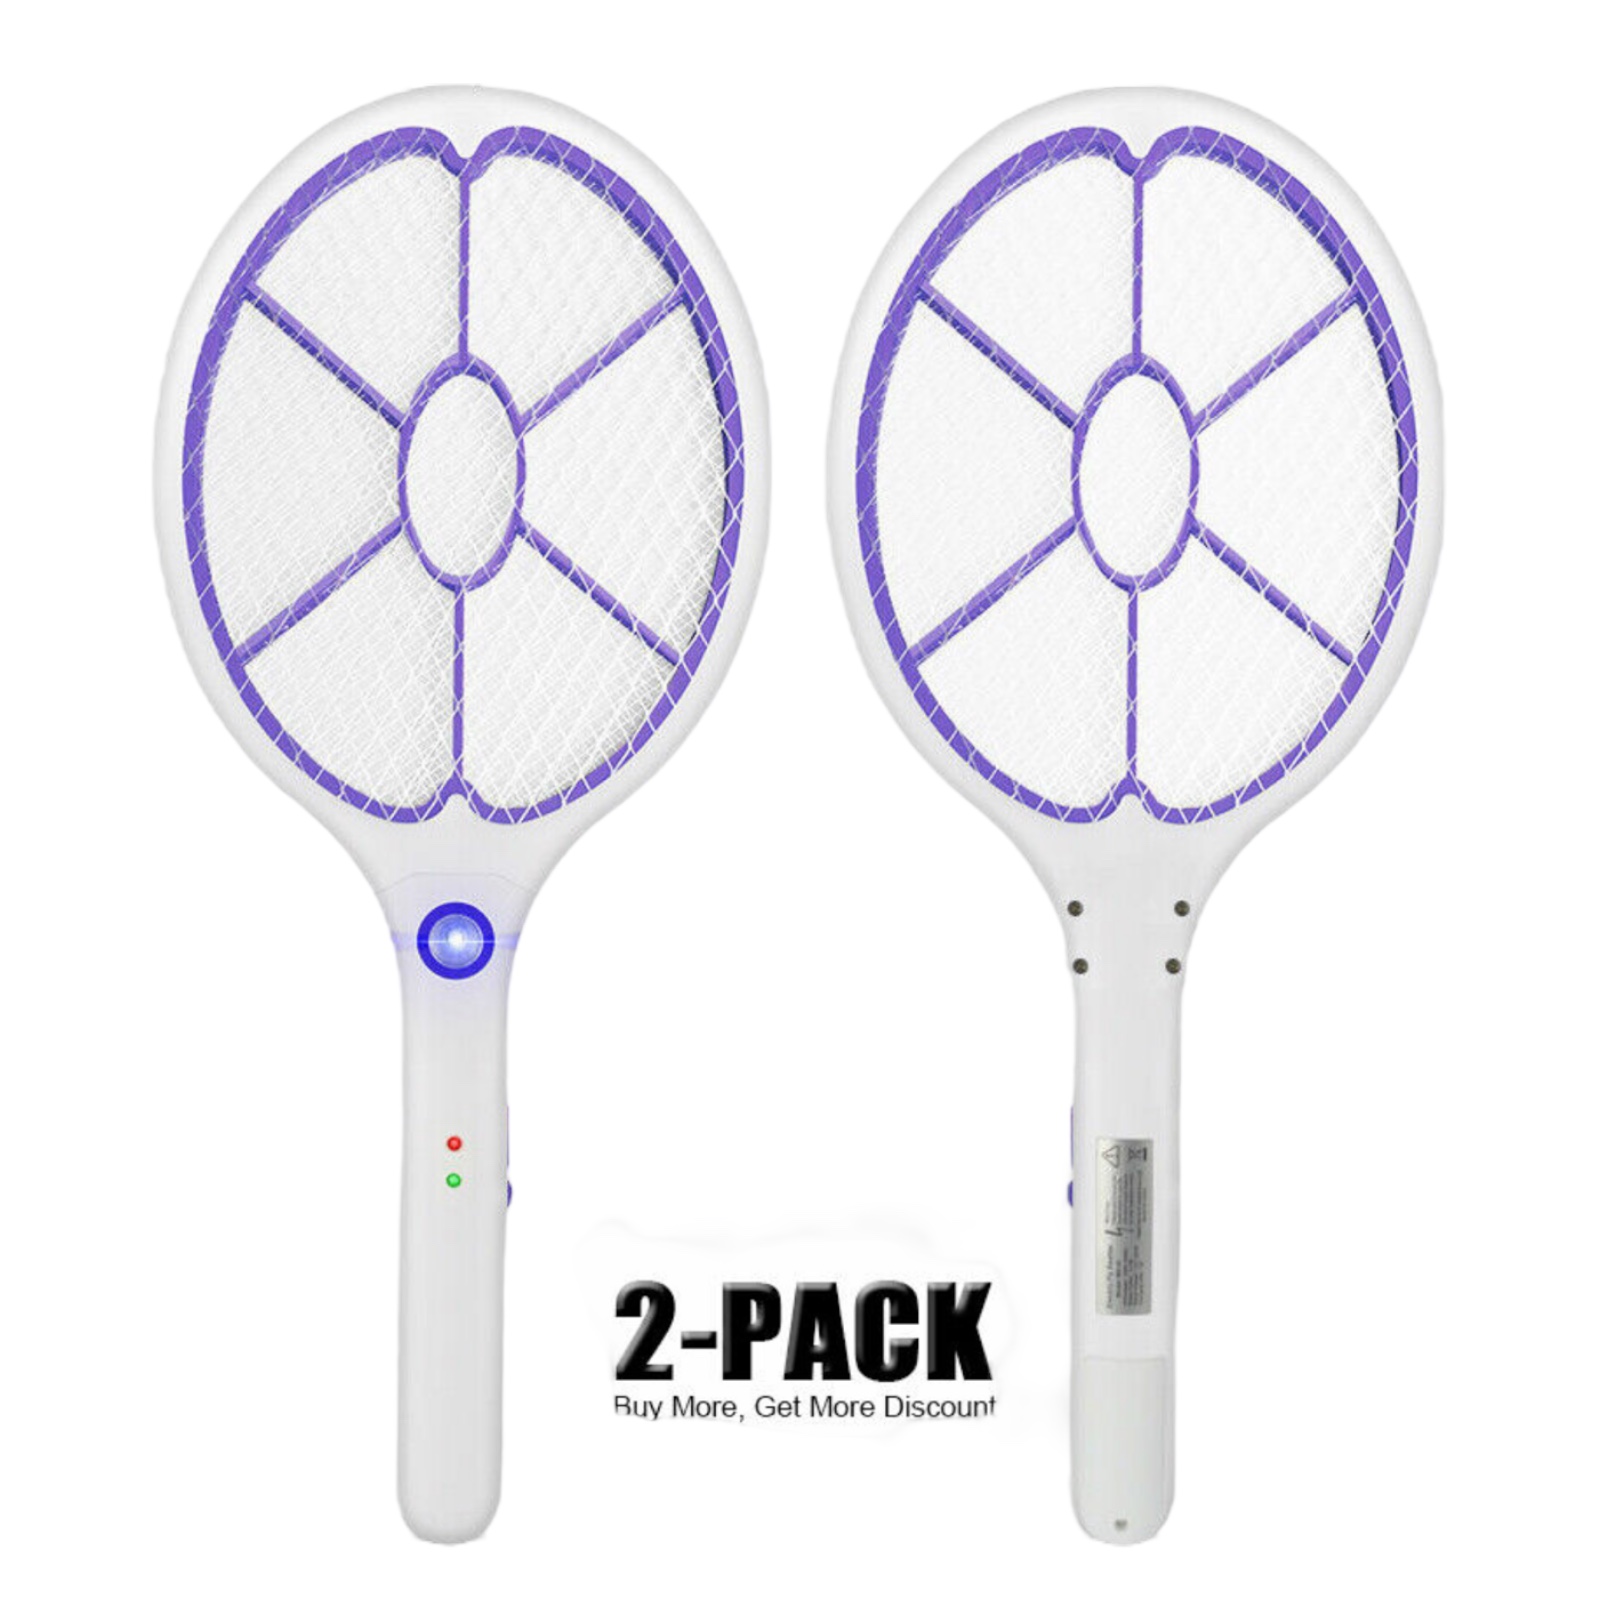 Set of 2 Rechargeable Electric Mosquito & Fly Zapper Rackets - Even has an attractant LED Light to pull in flies so you can GET'EM! Fun....sure, but they work very, VERY well! Thousands of 5-star reviews! - Order 2 or more 2-packs and SHIPPING IS FREE!